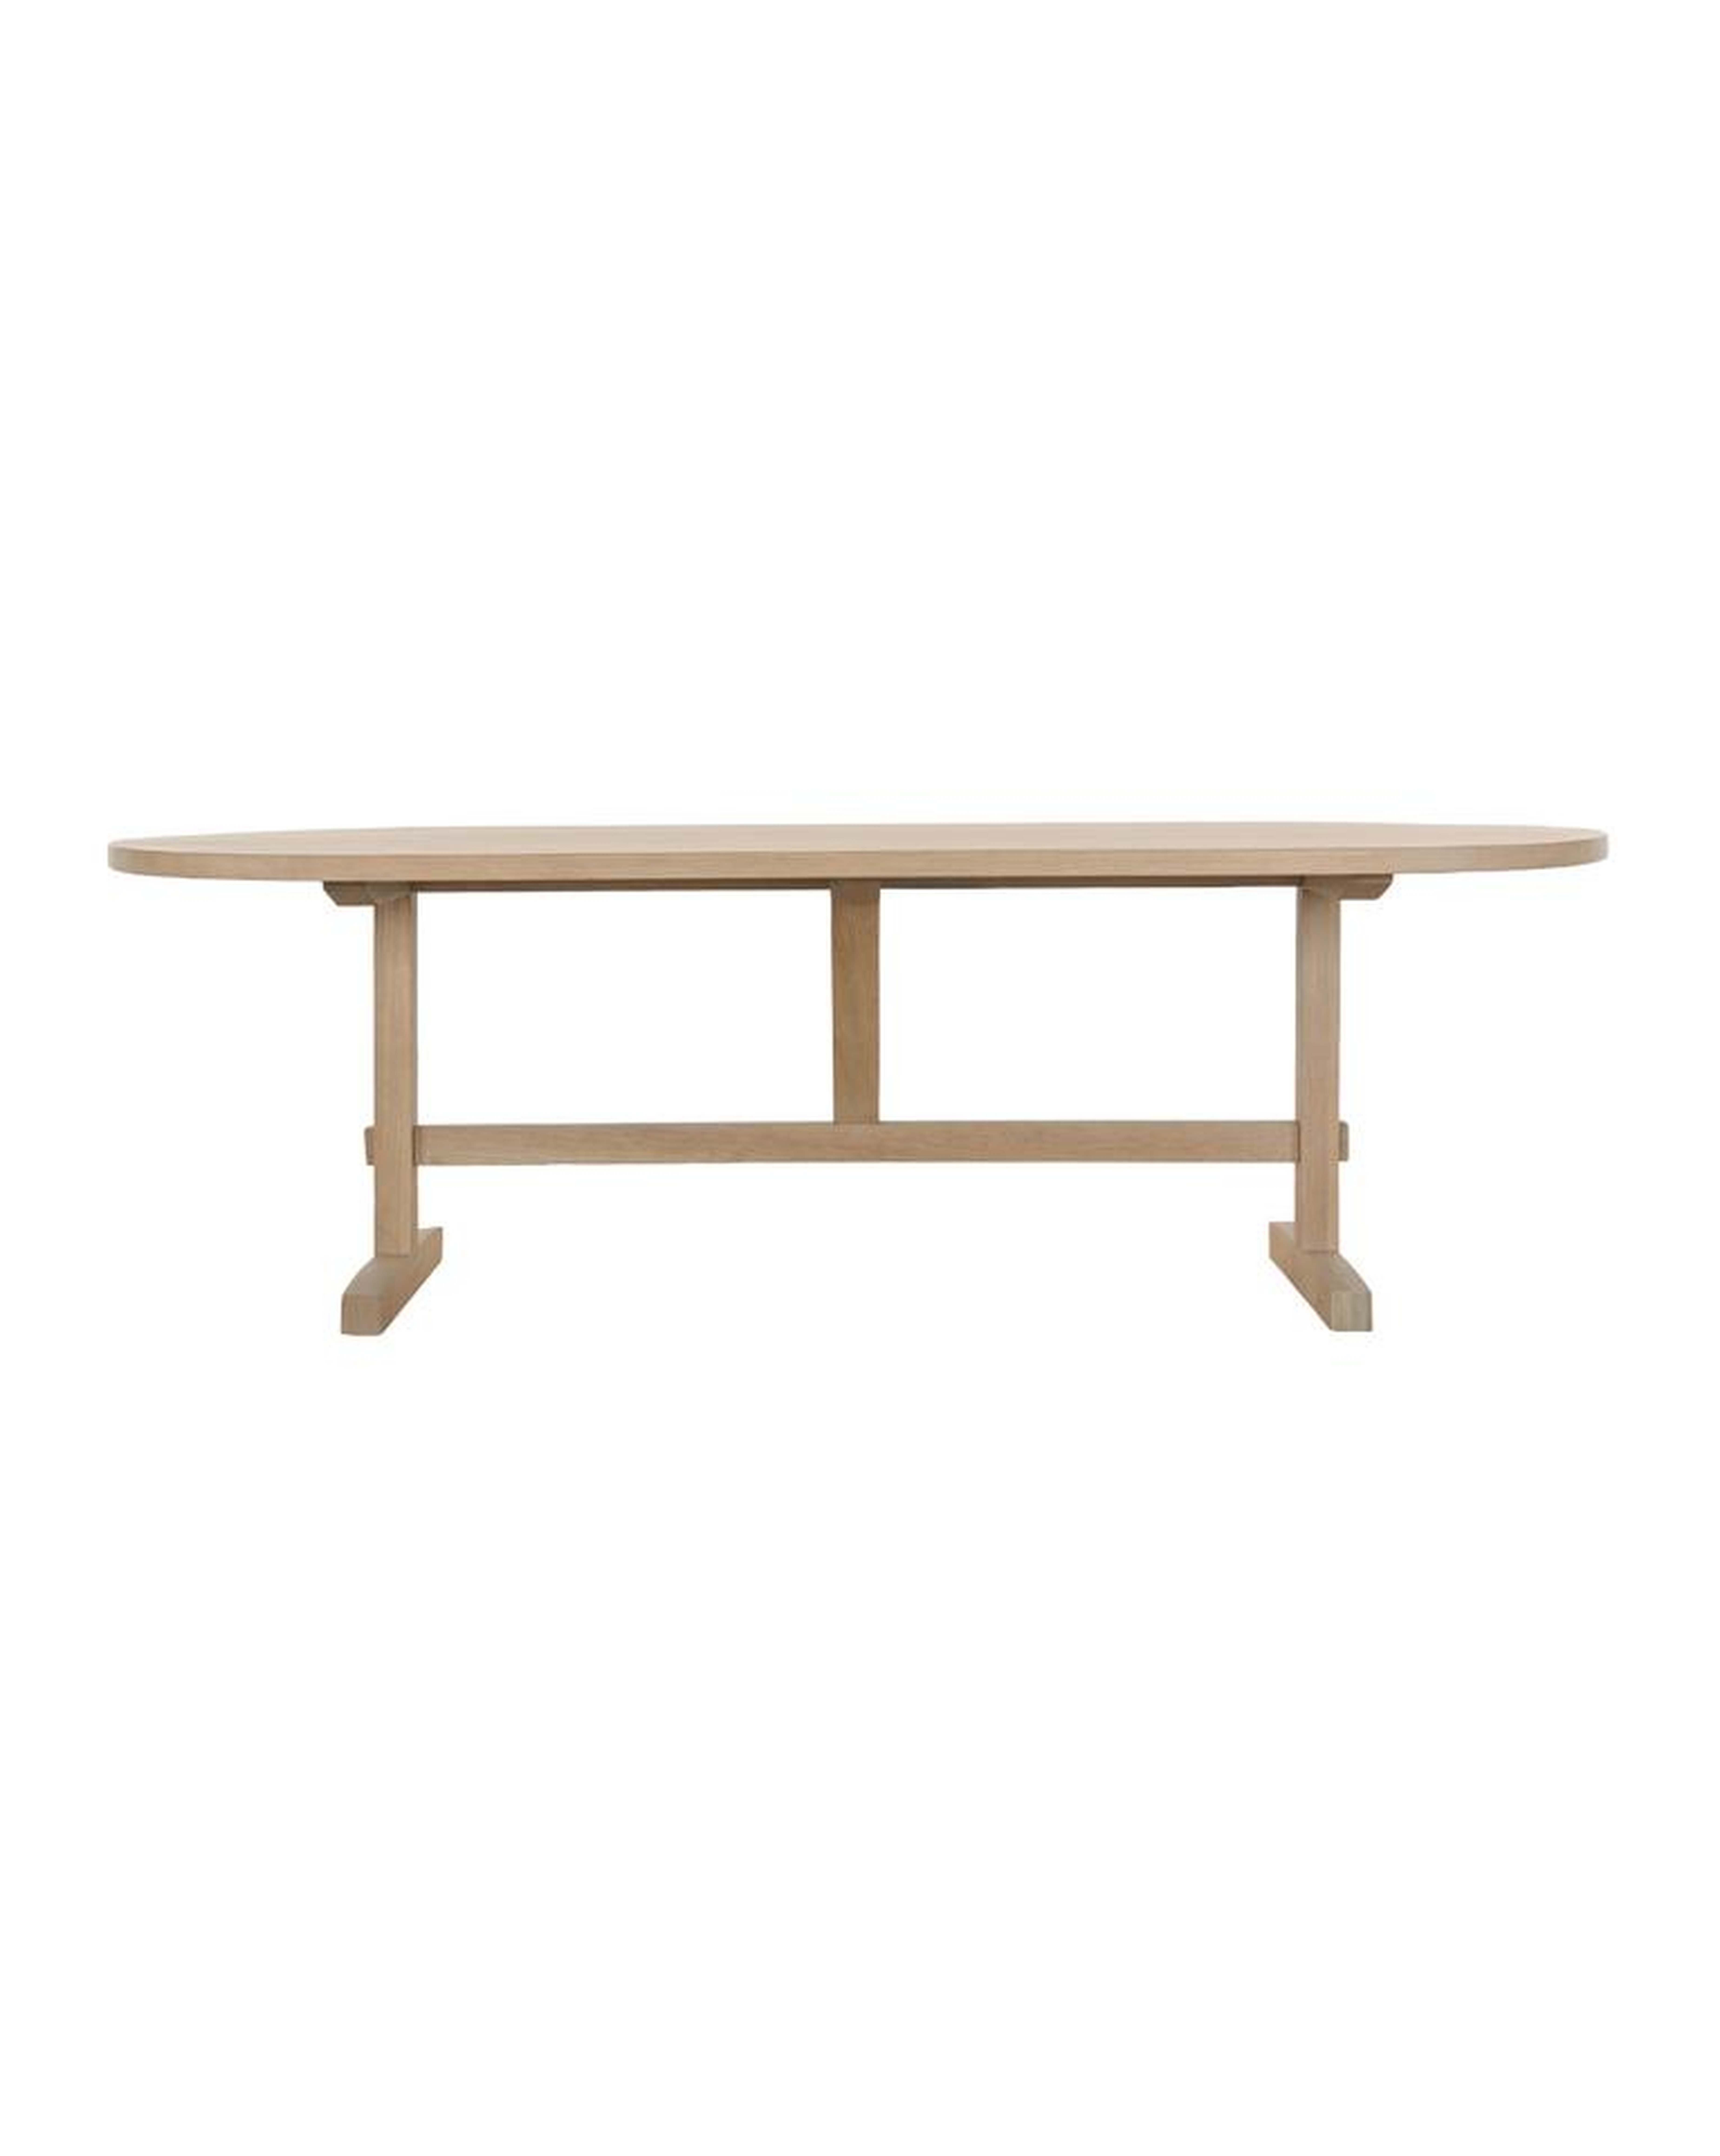 GISELLE OVAL DINING TABLE - McGee & Co.